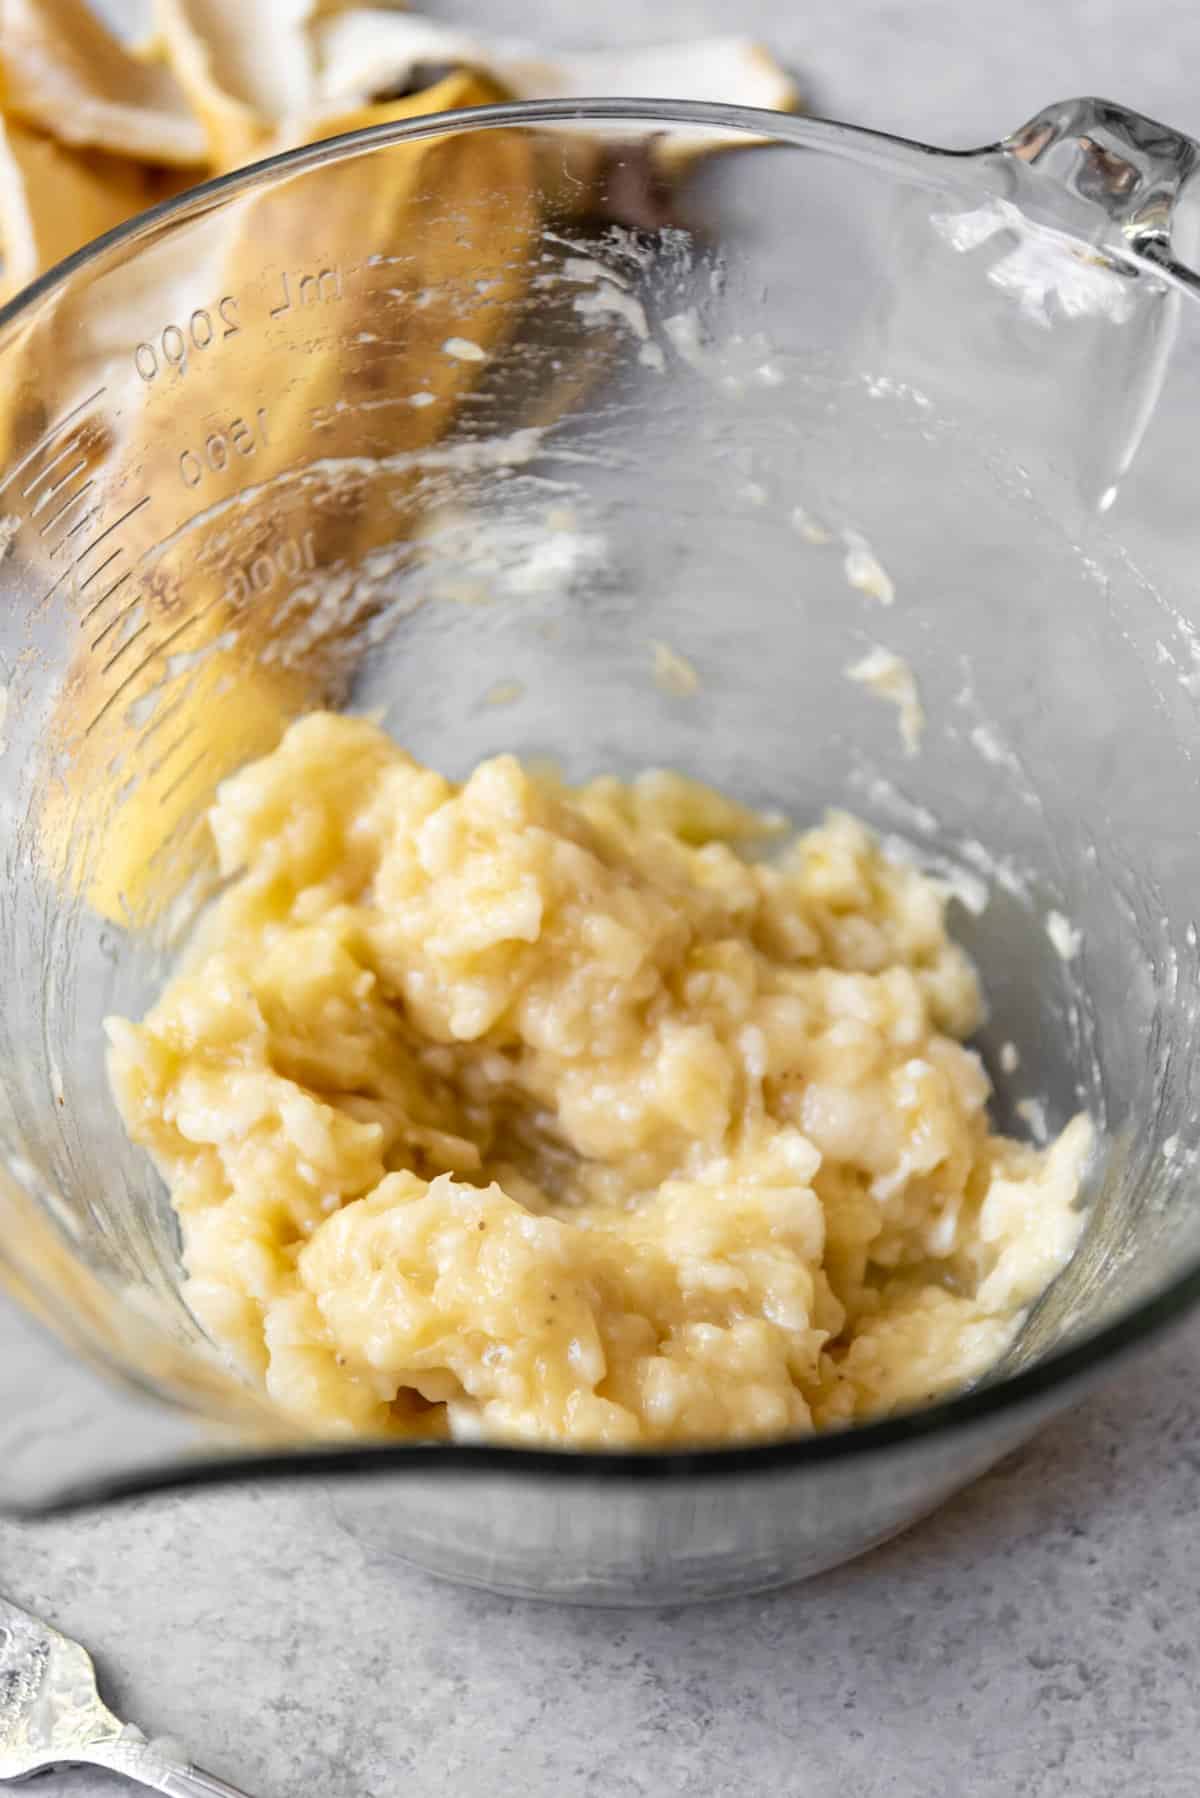 Mashed bananas in a glass bowl.